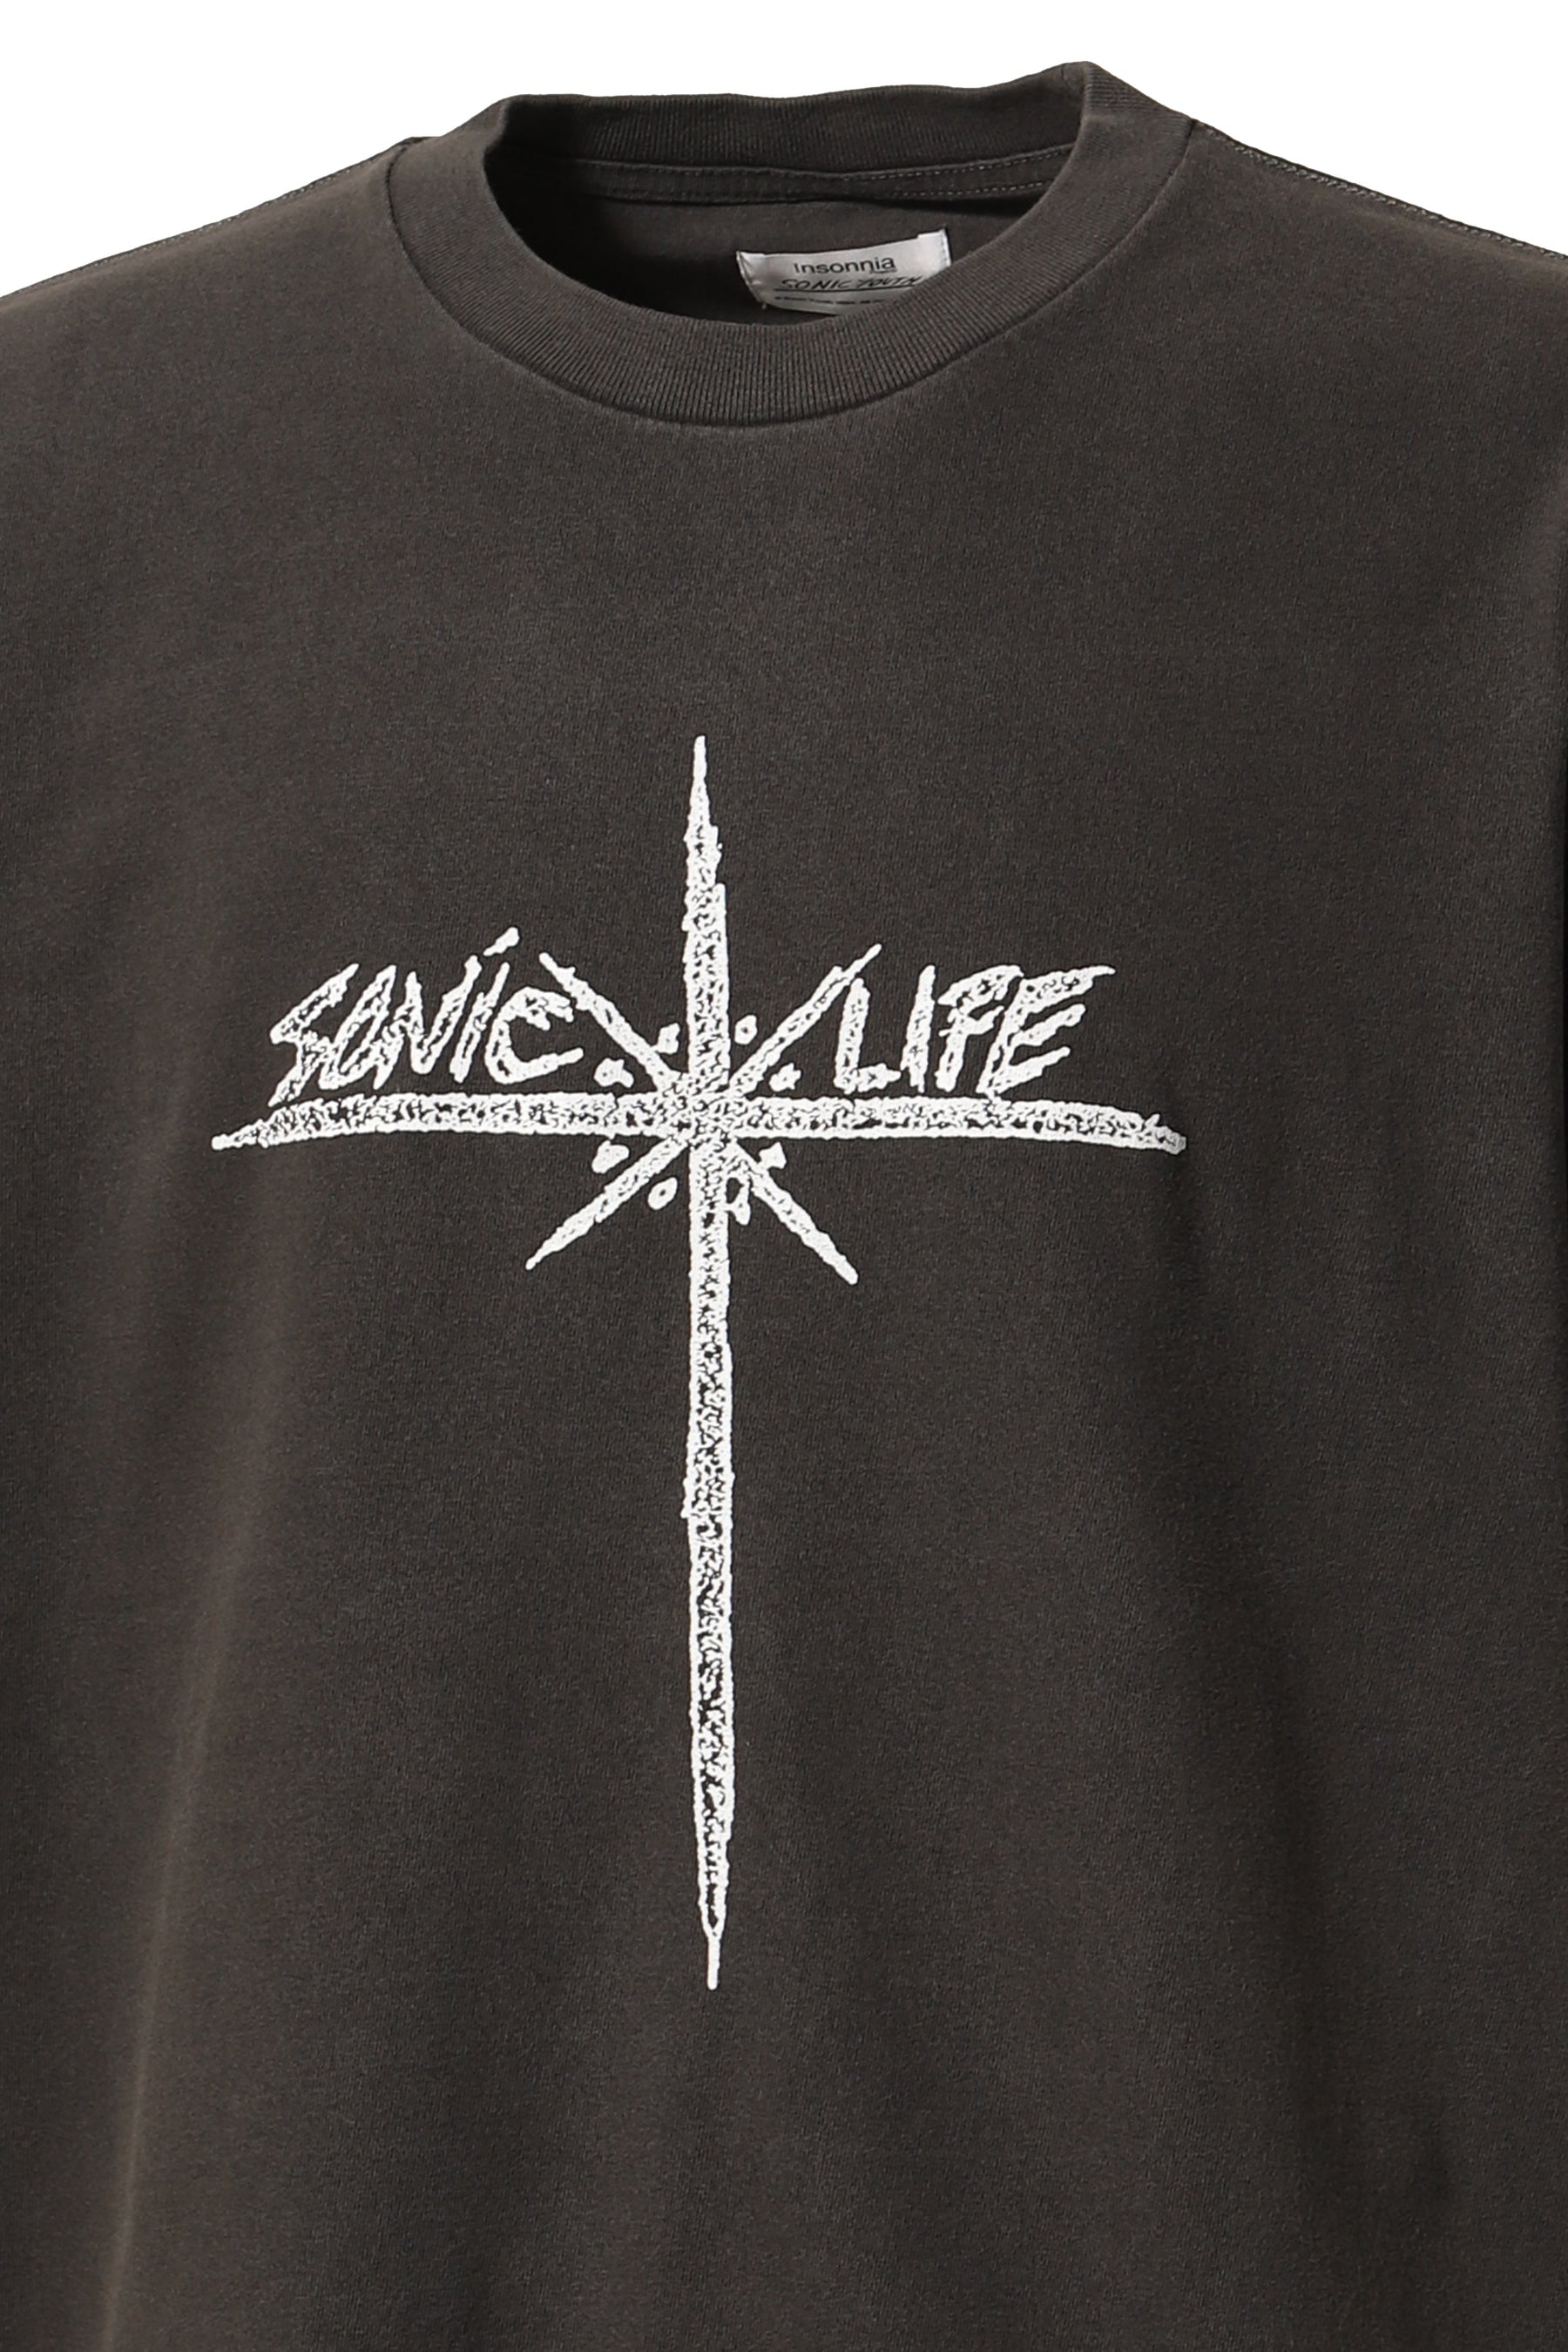 SONIC YOUTH SONIC LIFE TEE / BLK